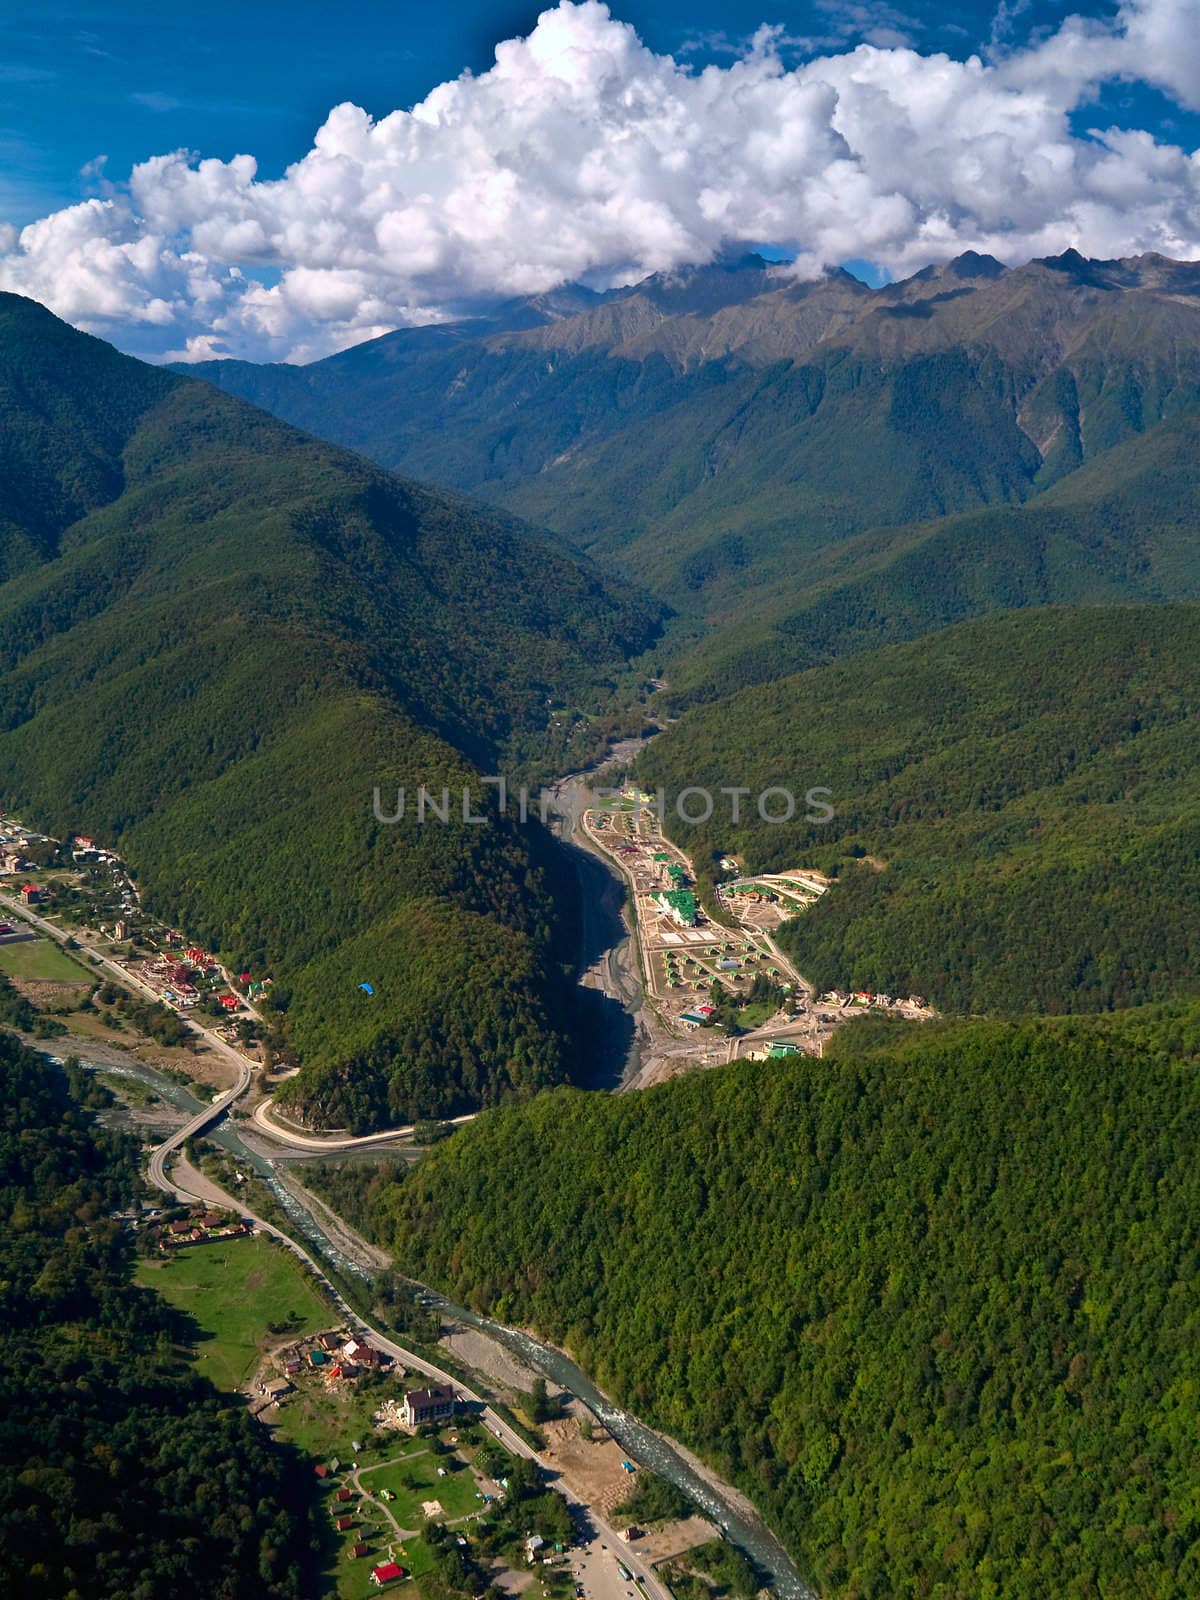 Aerial view of Krasnaya Poluana place (Sochi, Russia). The resort is slated to host the snow events (alpine and nordic) of the 2014 Winter Olympics in Sochi.